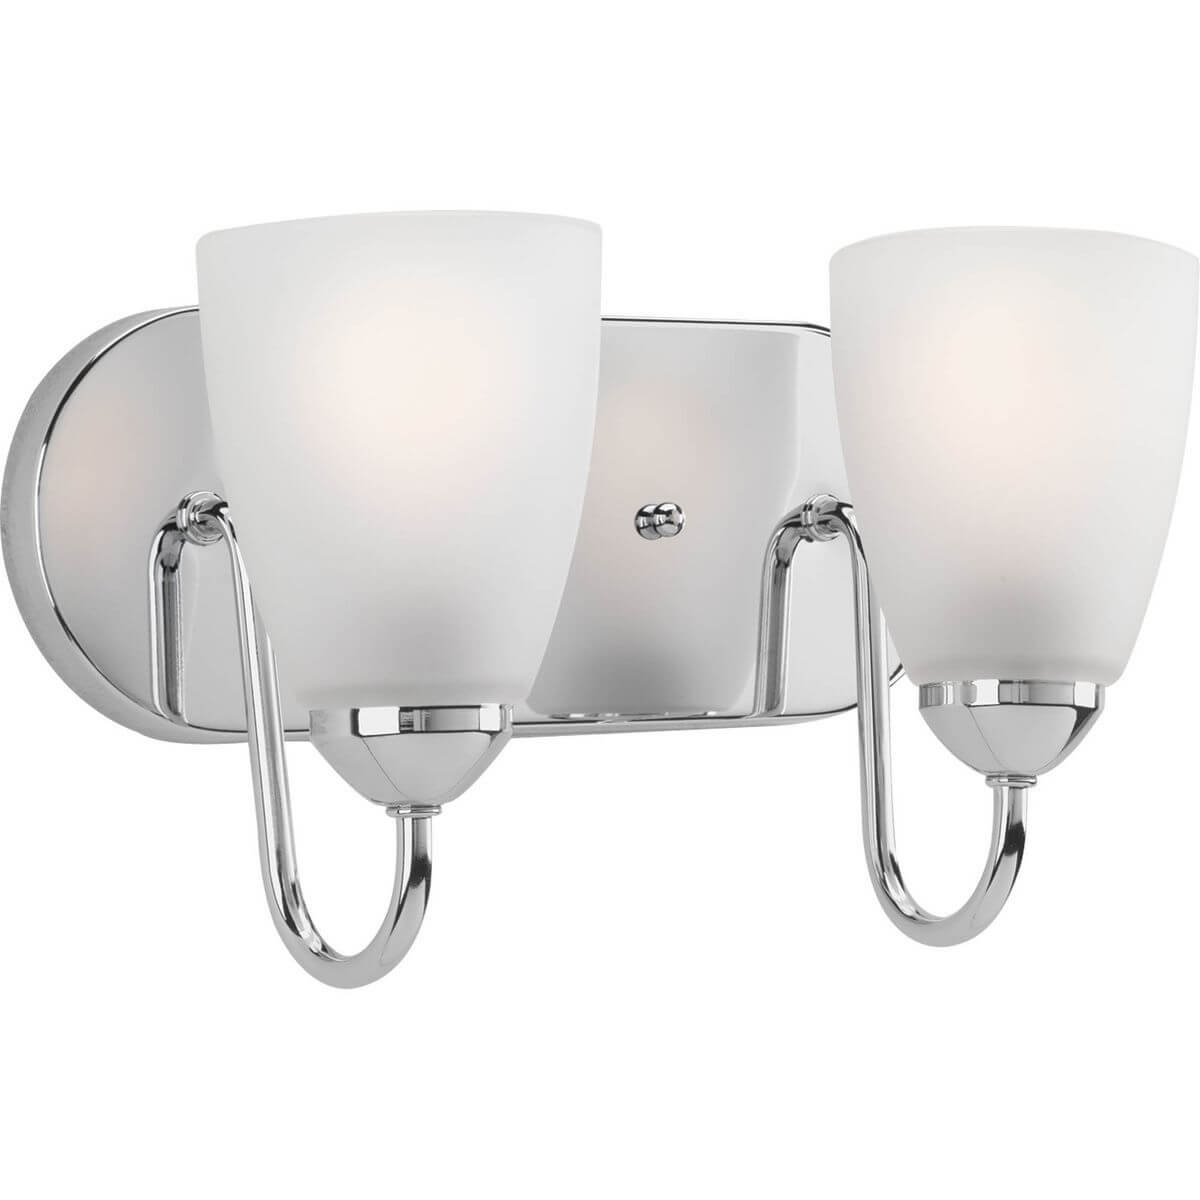 Progress Lighting Gather 2 Light 12 inch Bath Vanity Light in Polished Chrome with Etched Glass P2707-15